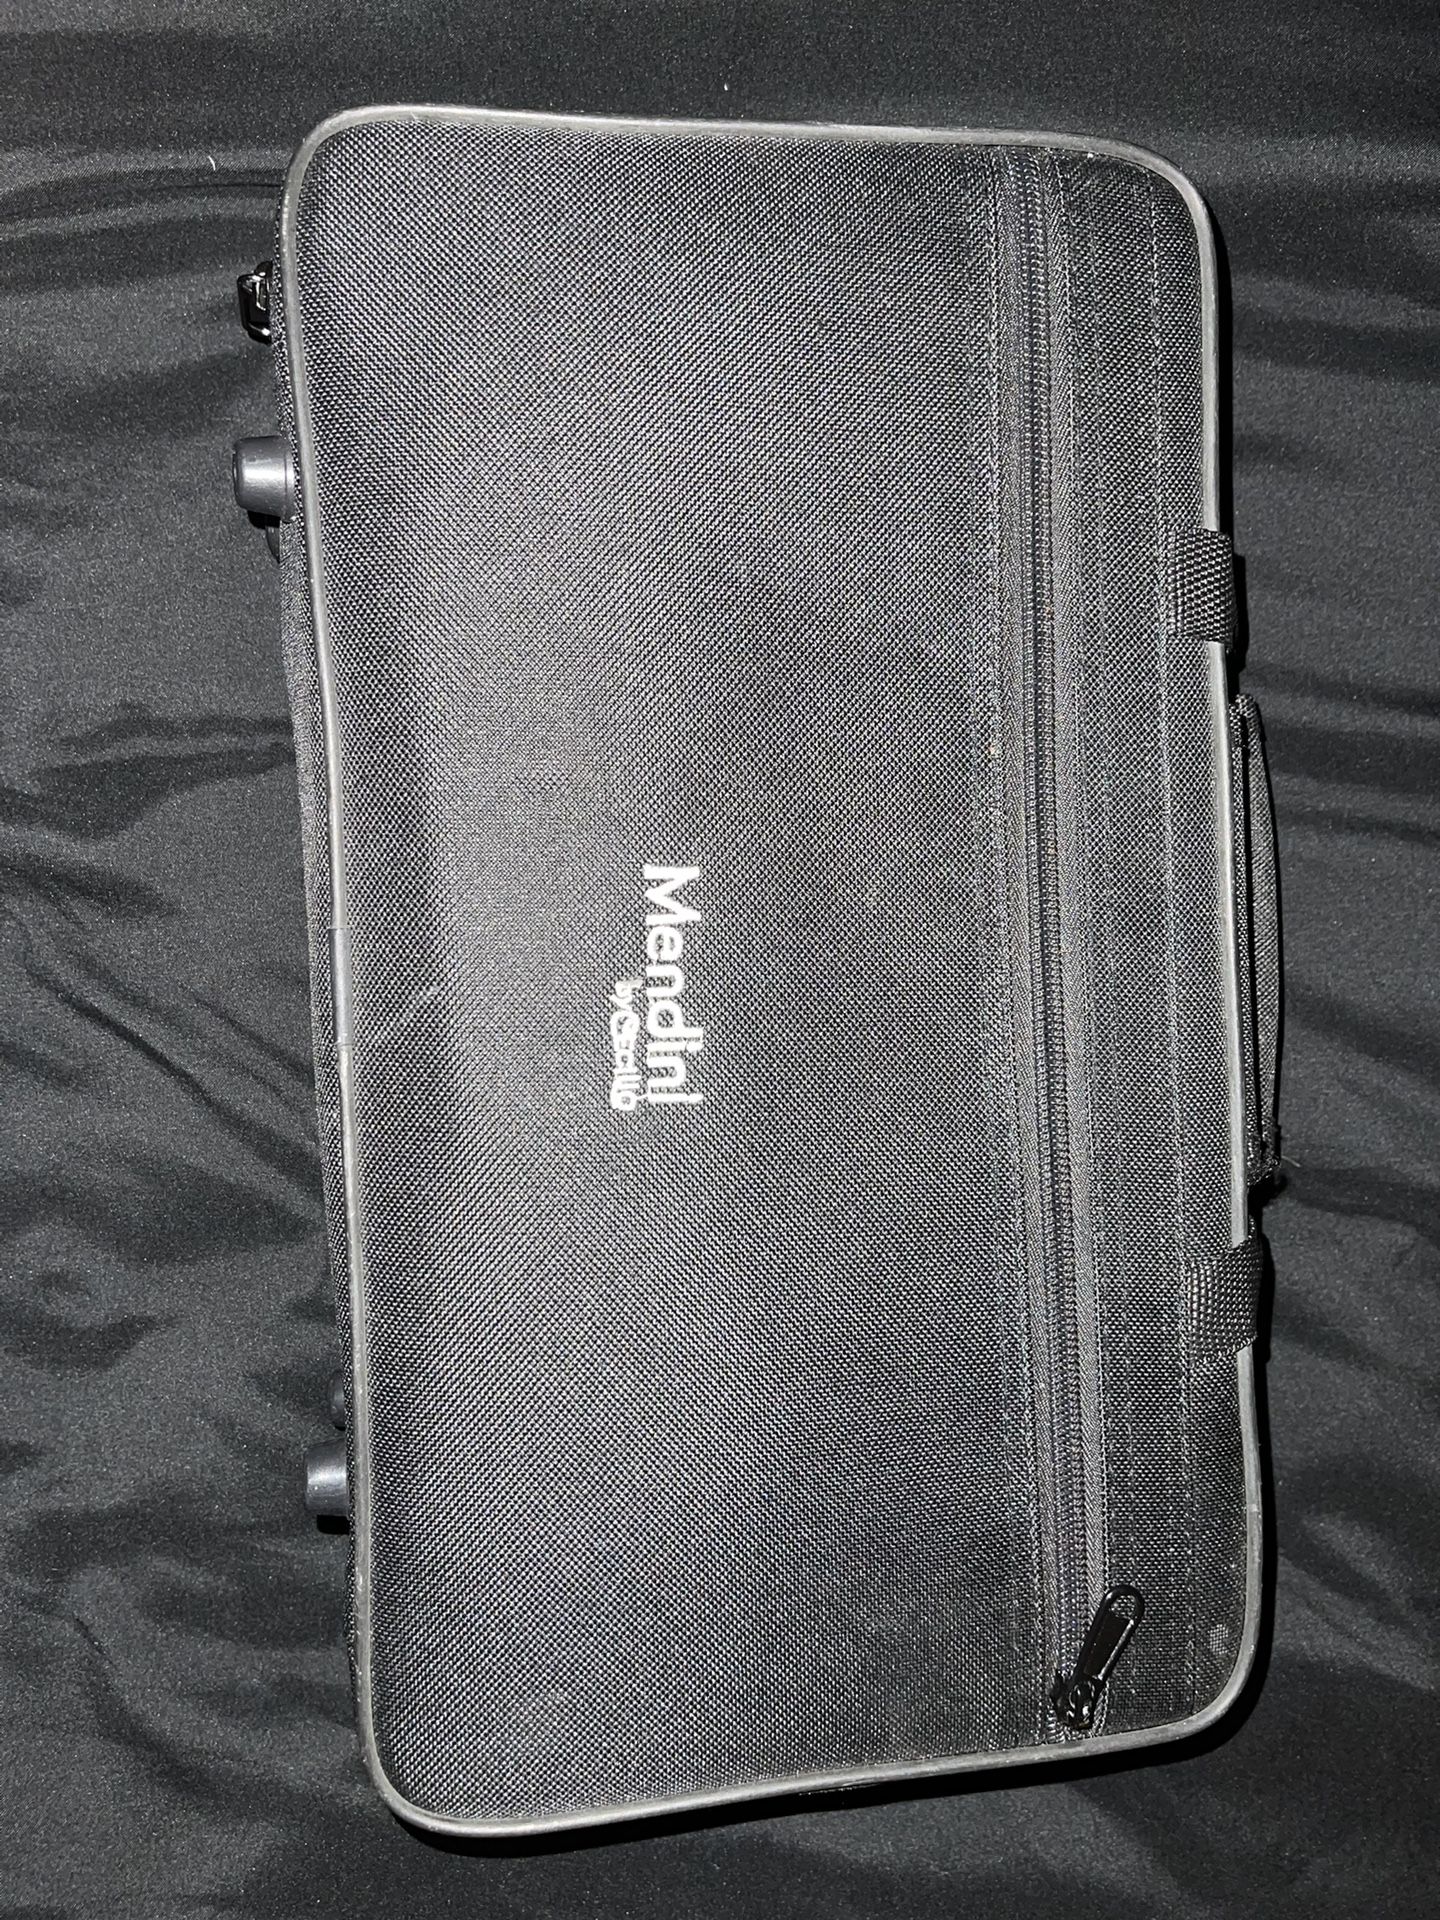 CLARINET WITH CASE 